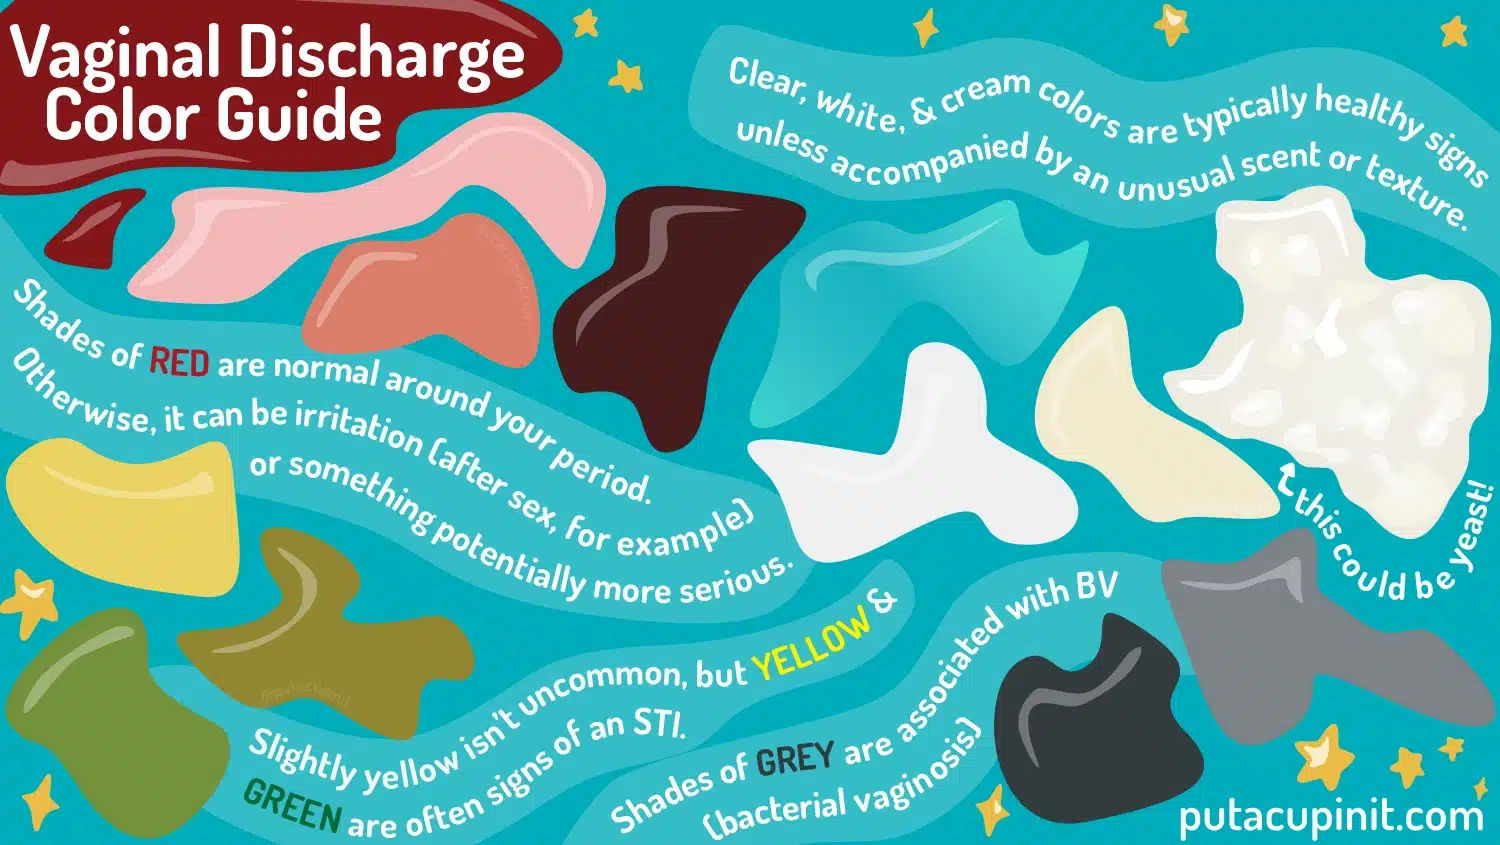 WHAT IS THE COLOR OF YOUR VAGINAL DISCHARGE? IS IT CLEAR, WHITE